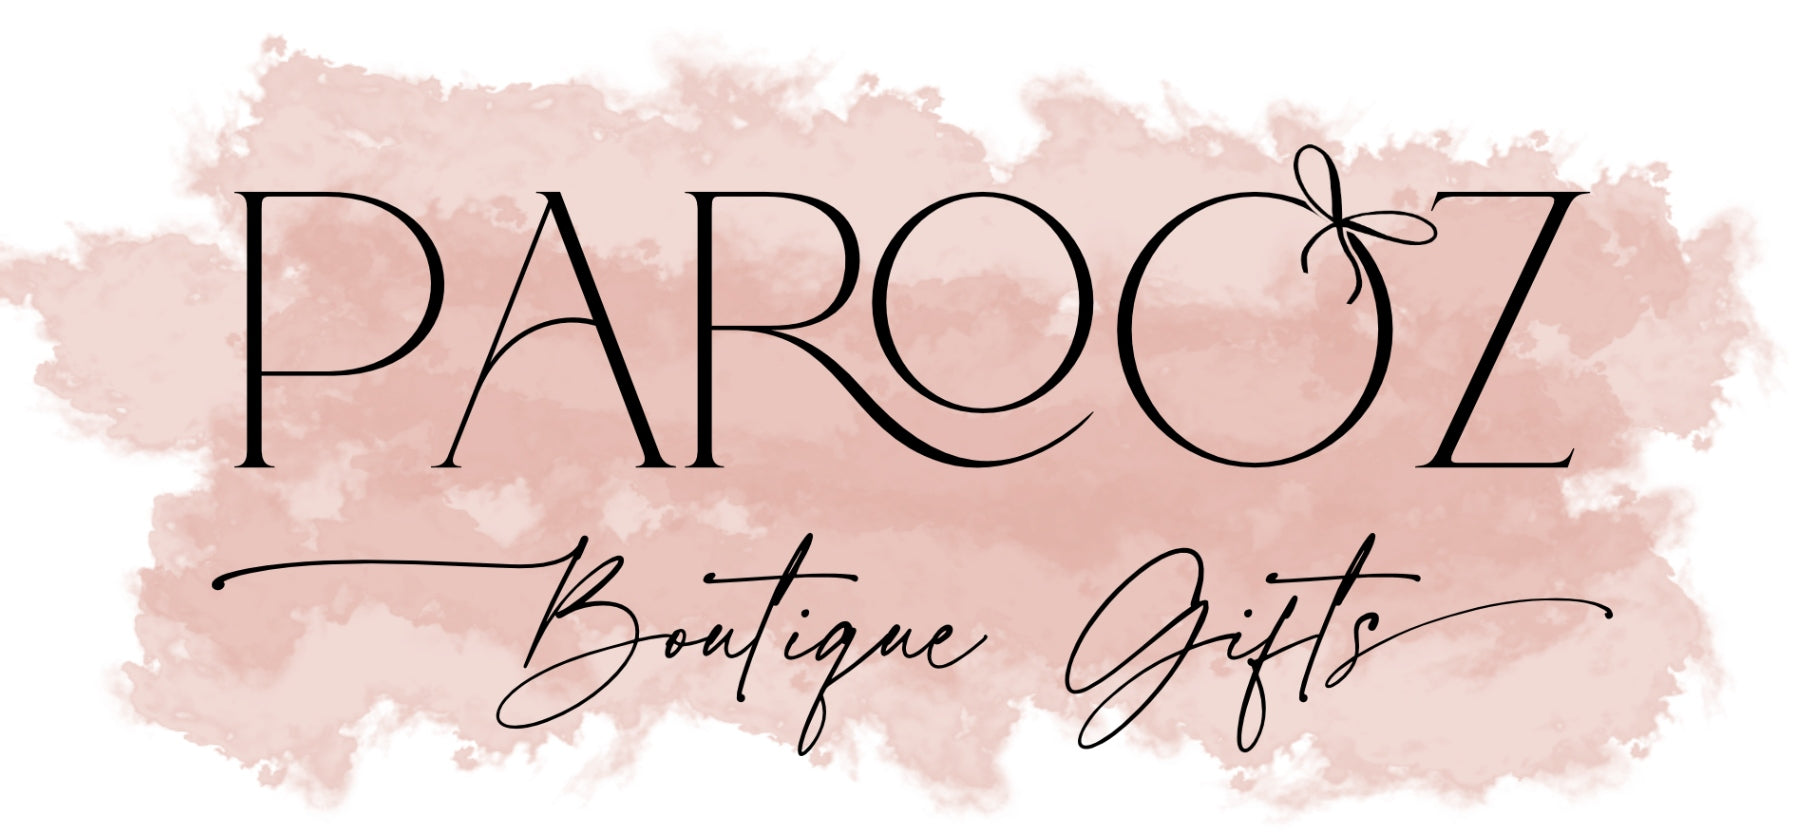 Parooz Boutique Gifts